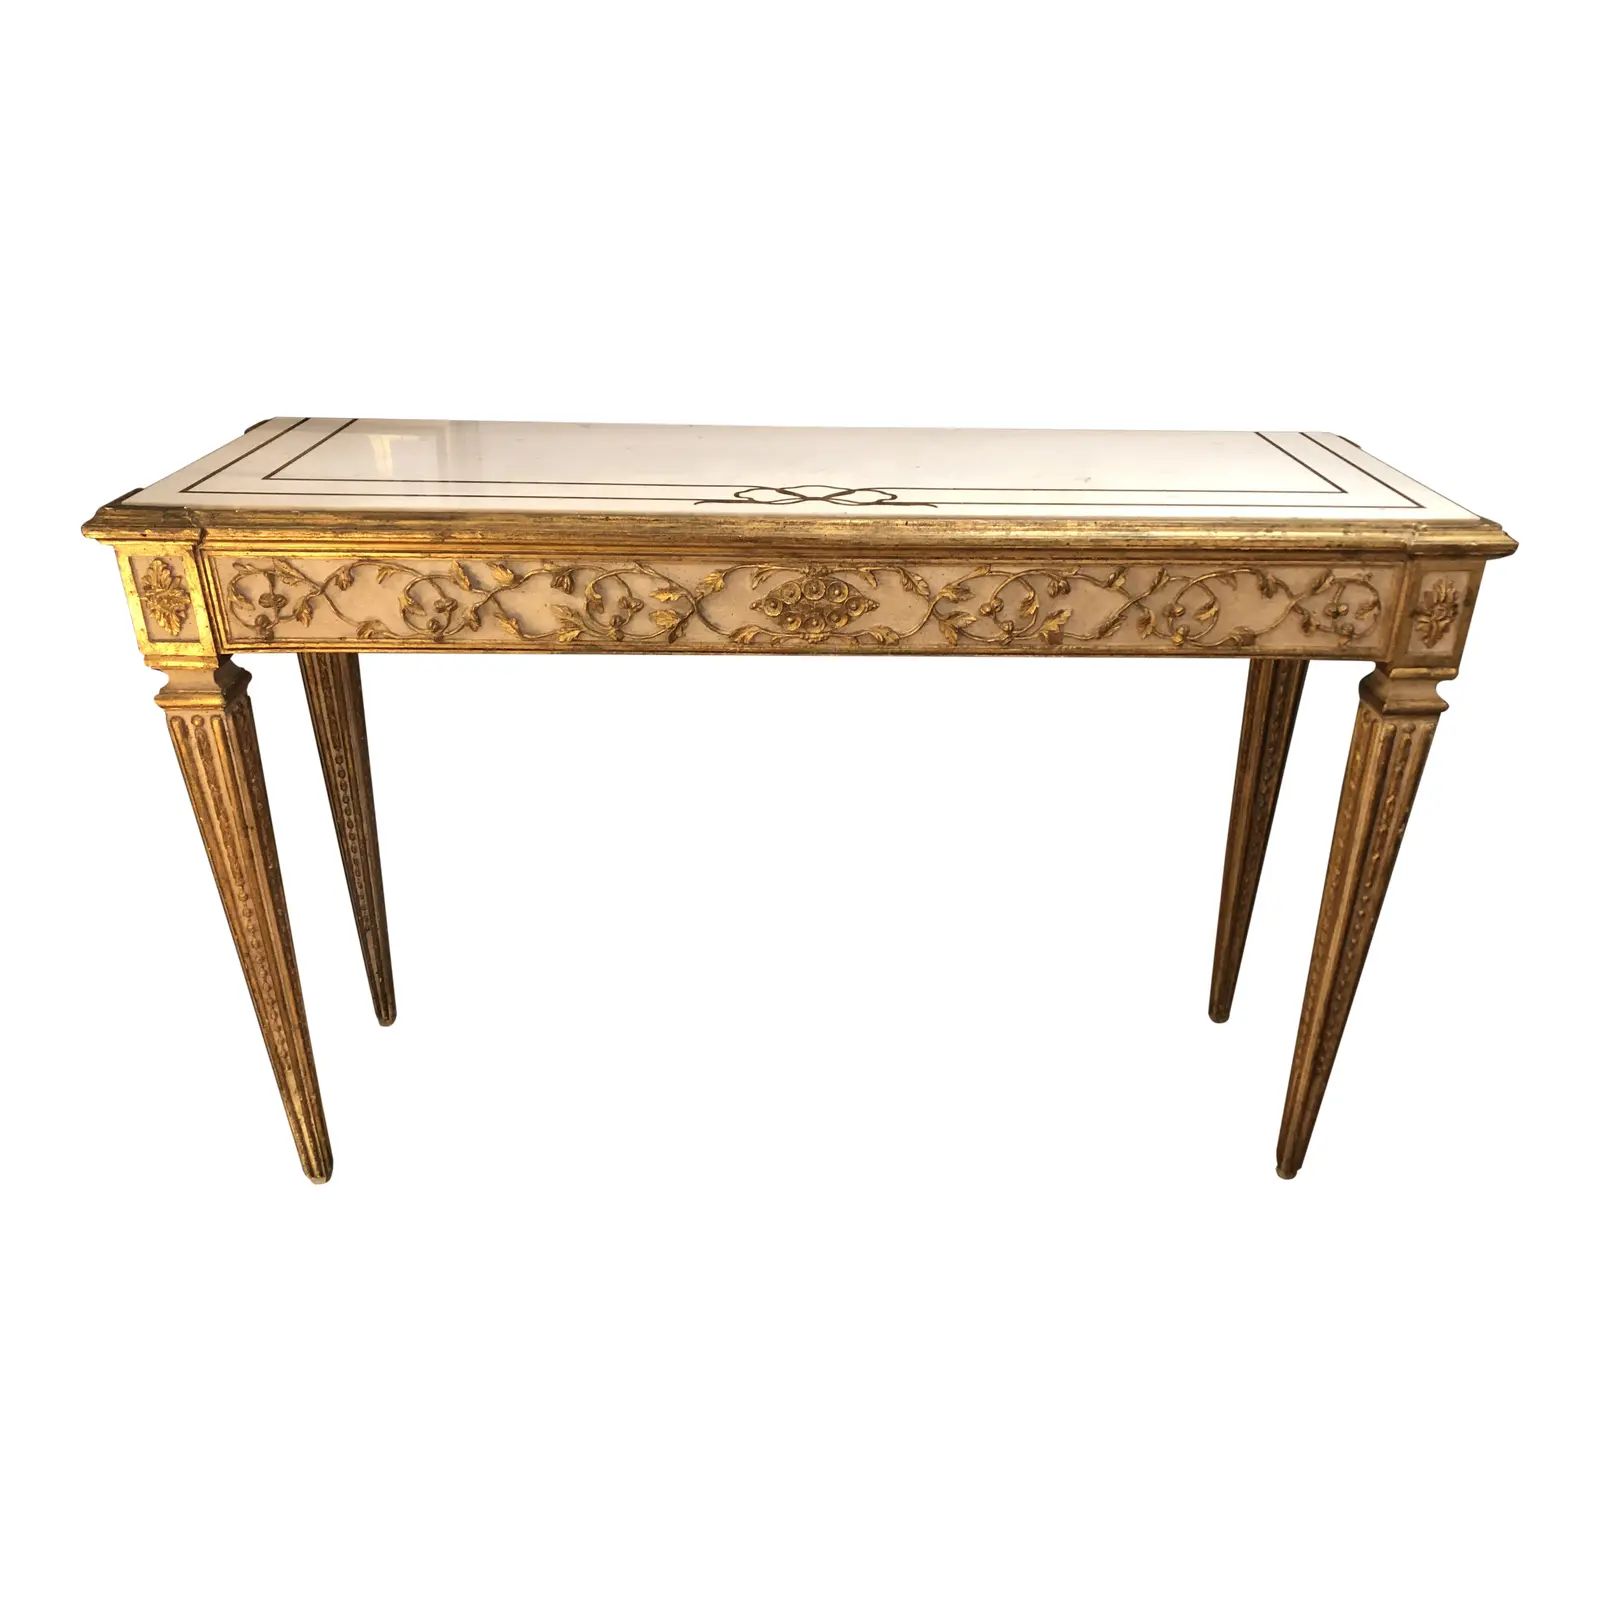 Antique Gilded Painted Italian Regency Console Table With Marble Top | Chairish